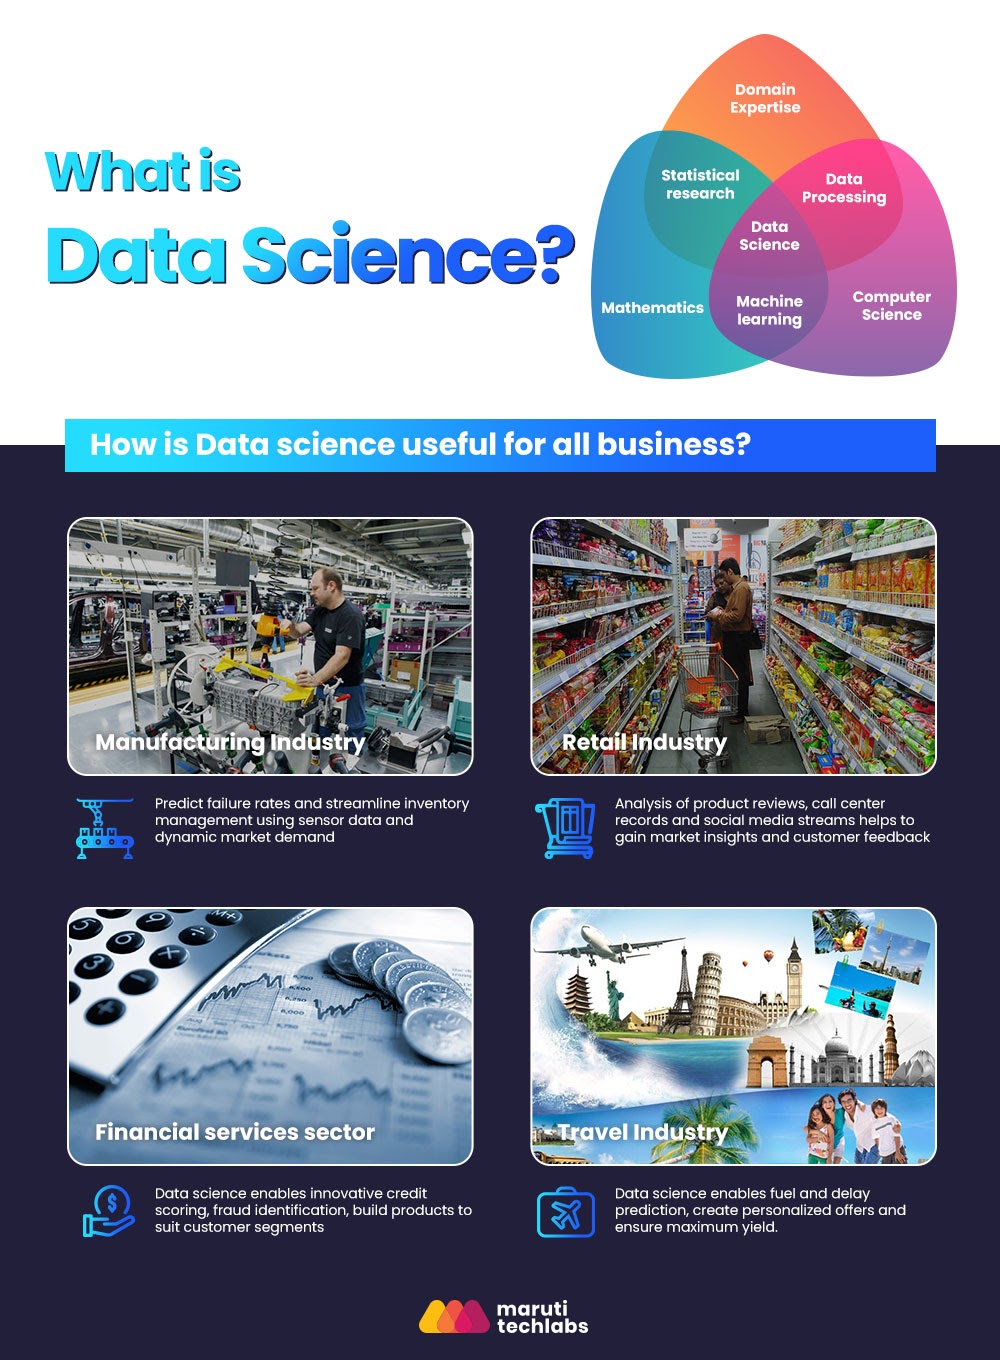  How-data-science-is-useful-for-all-businesses